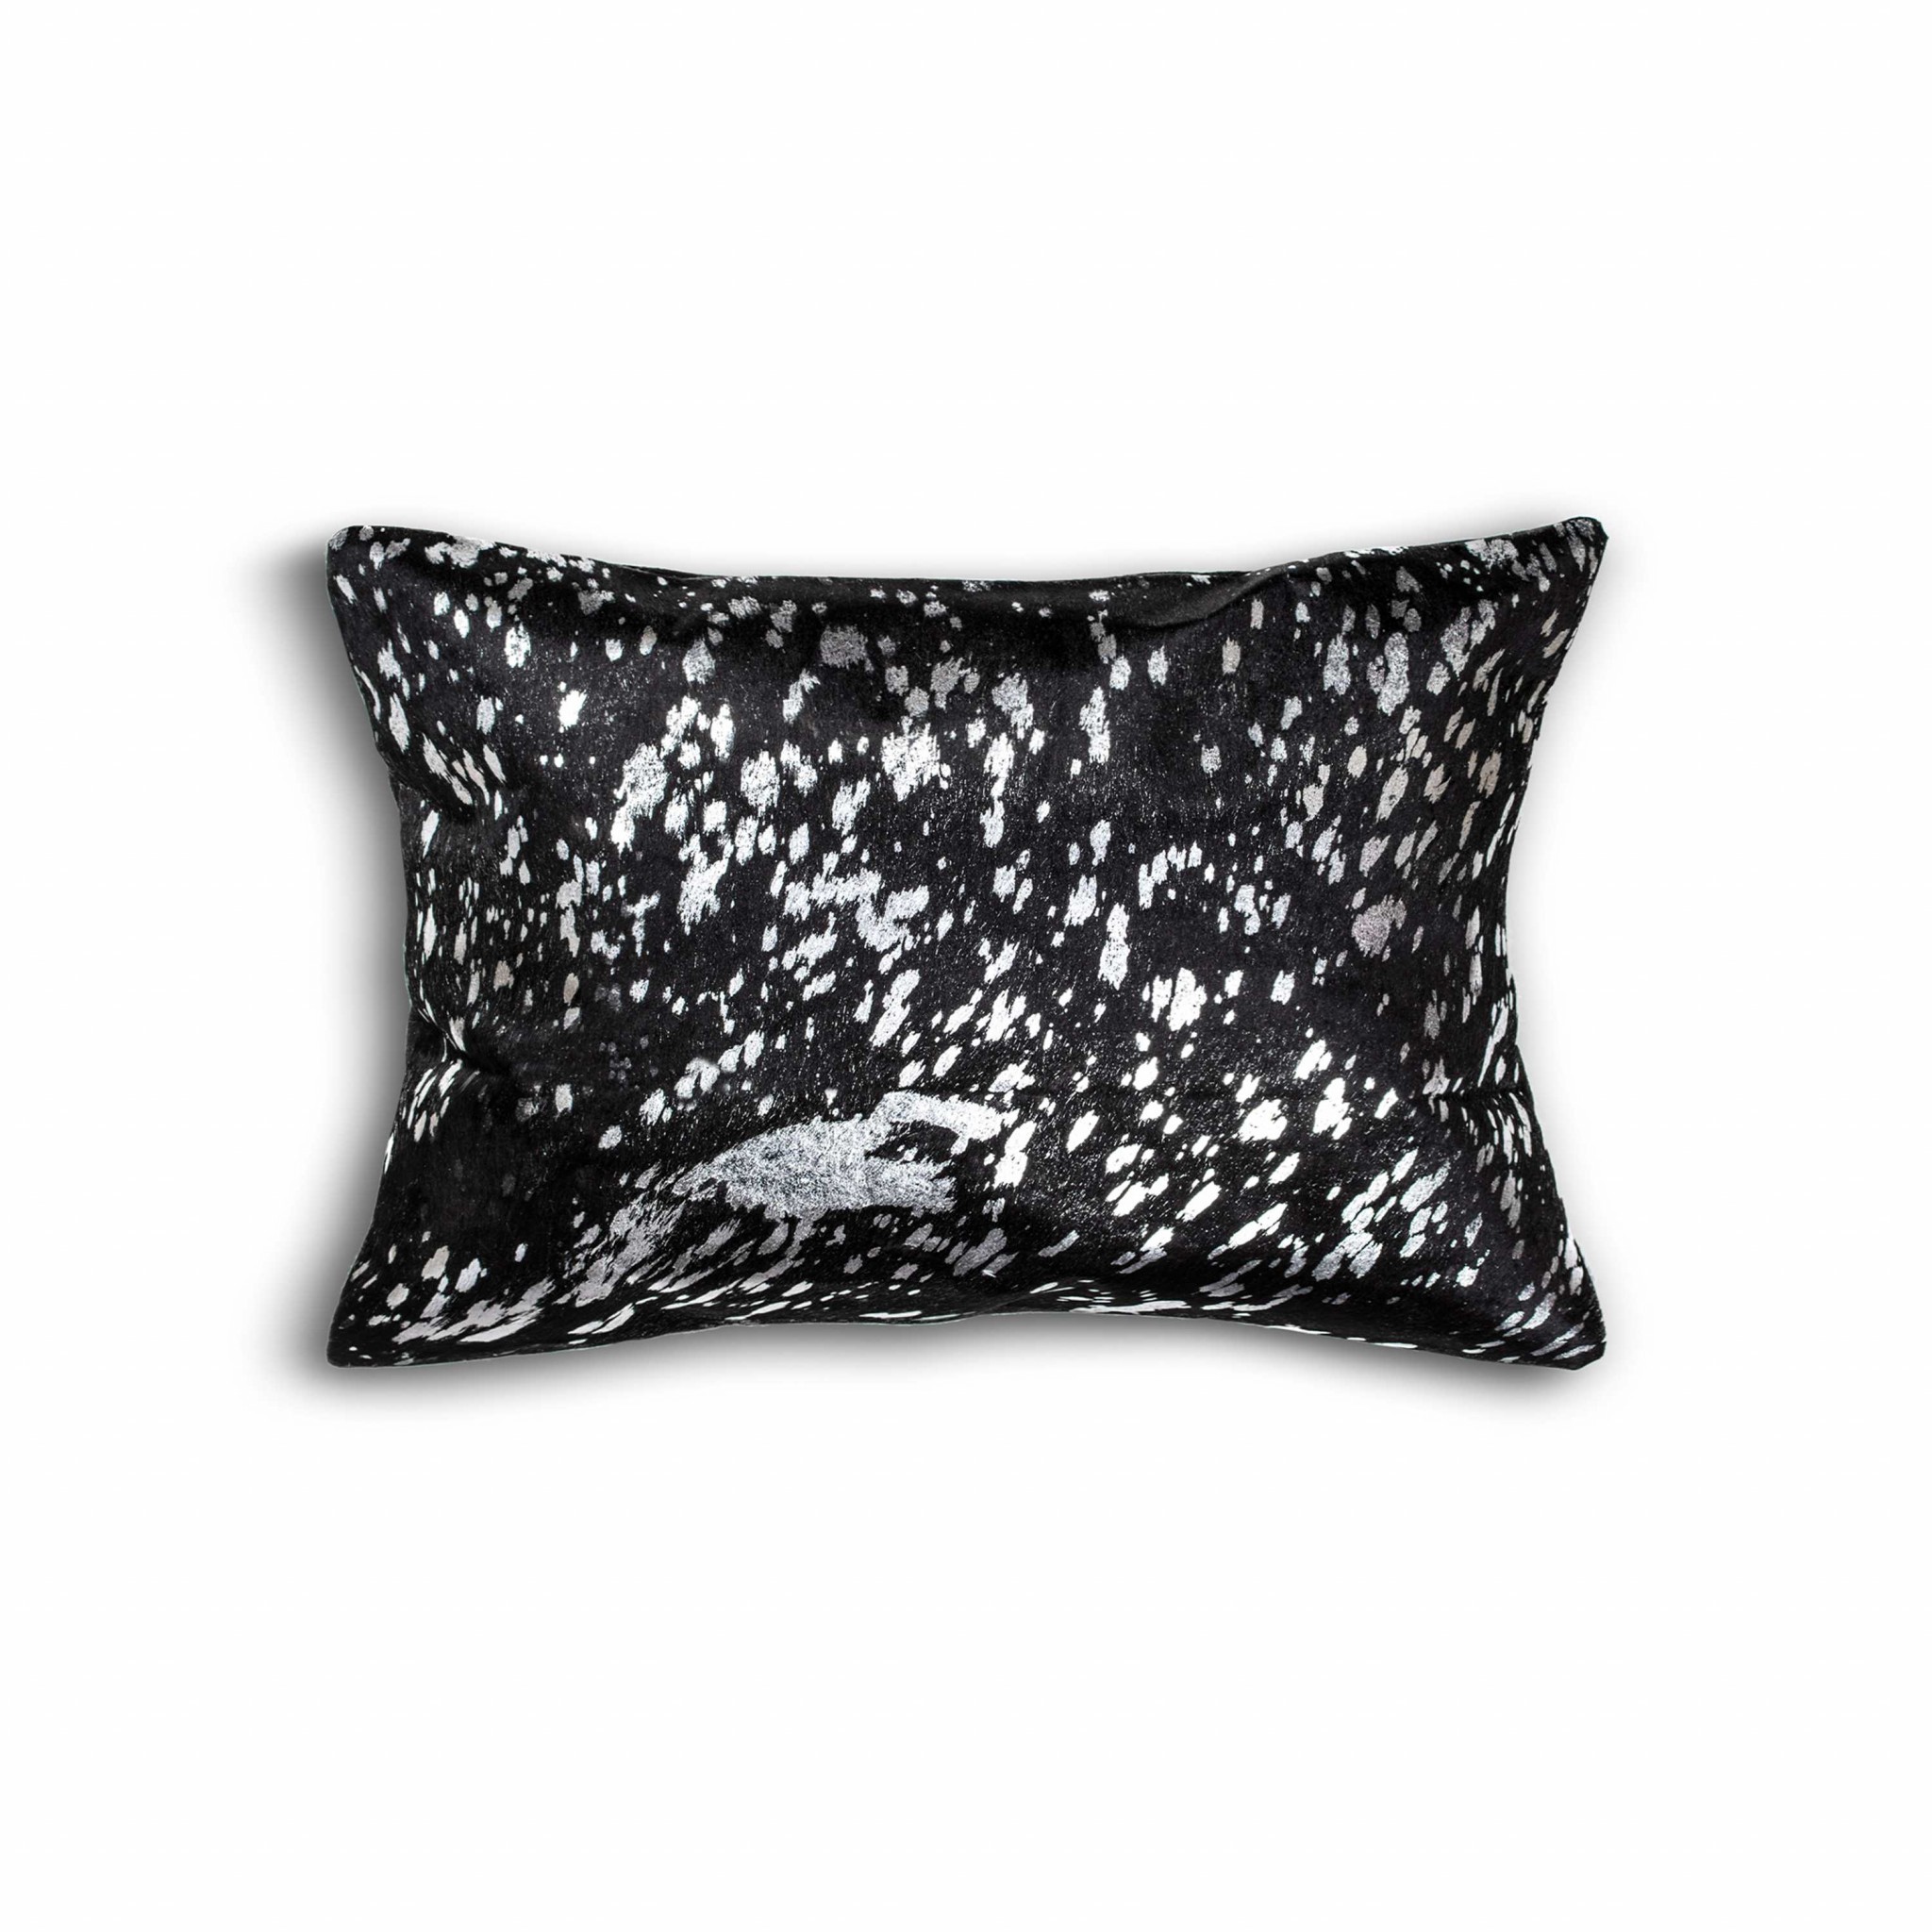 12" x 20" x 5" Black And Silver Cowhide - Pillow